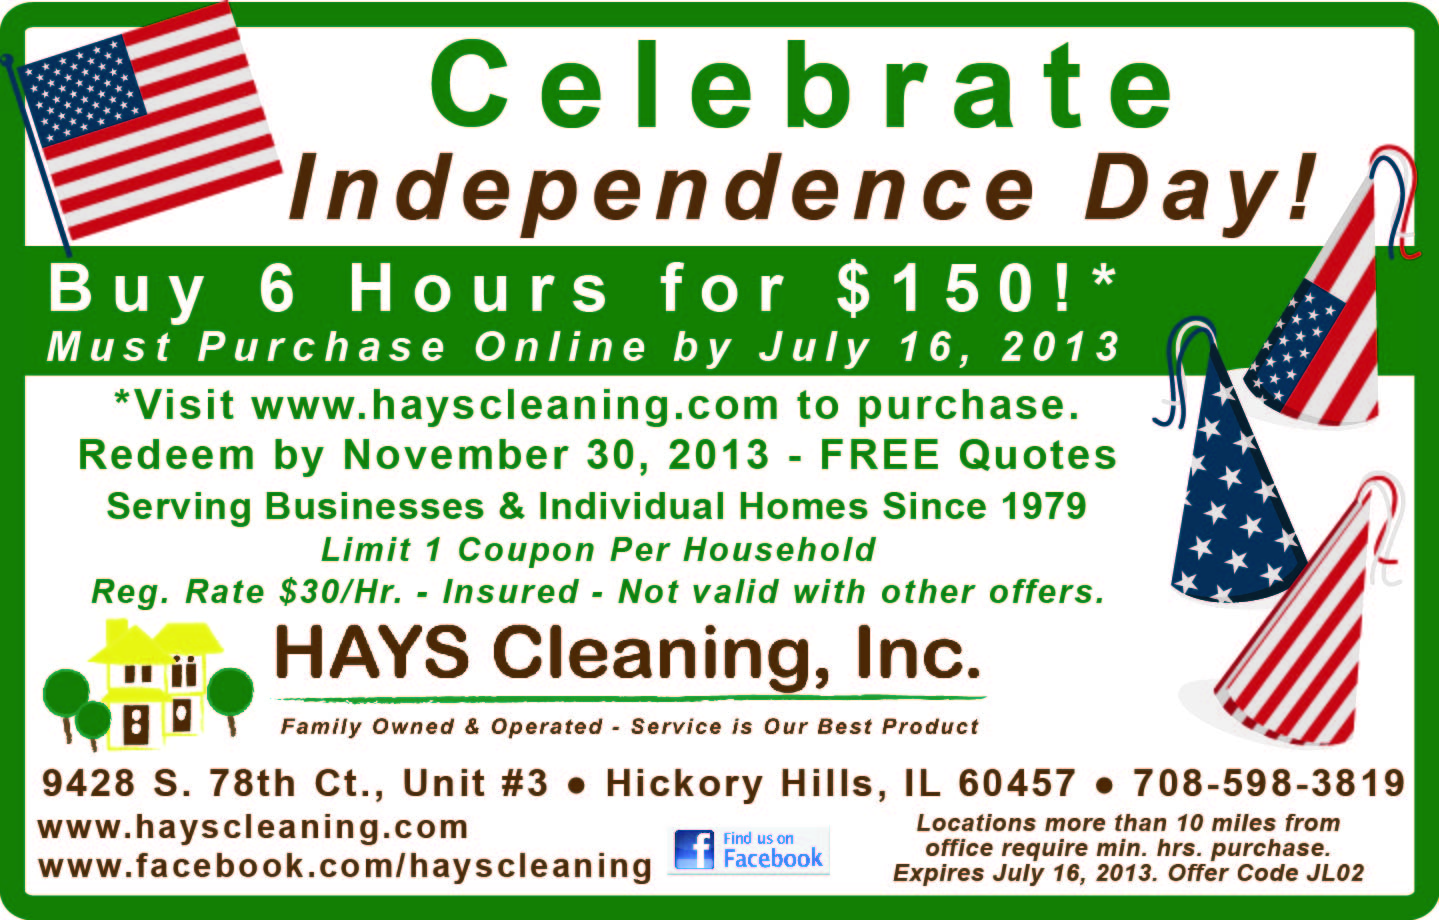 HAYS Cleaning 7-2-13